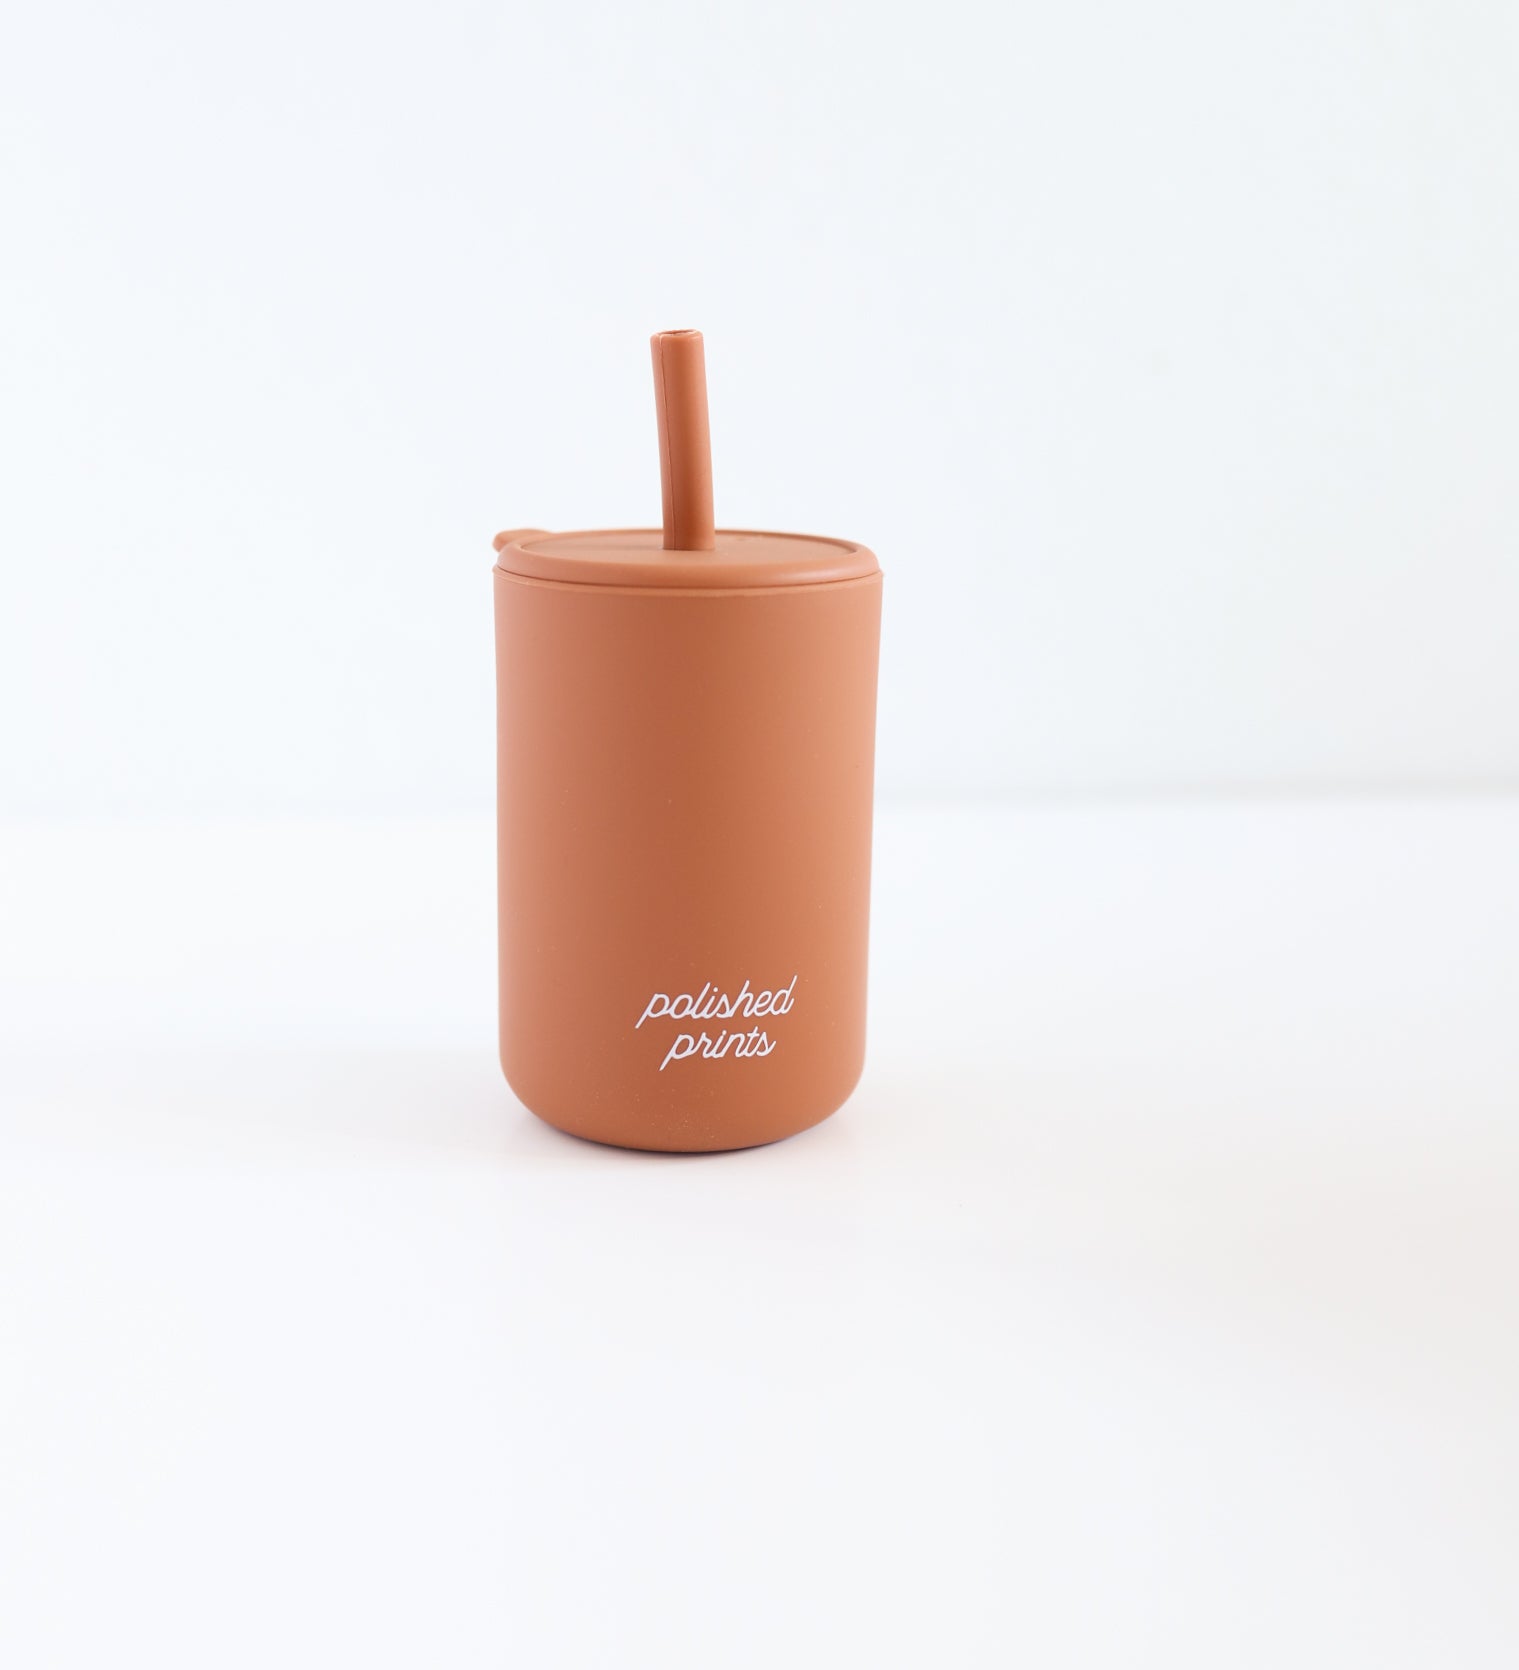 Silicone Straw Cup with Lid - Primary Color Edition